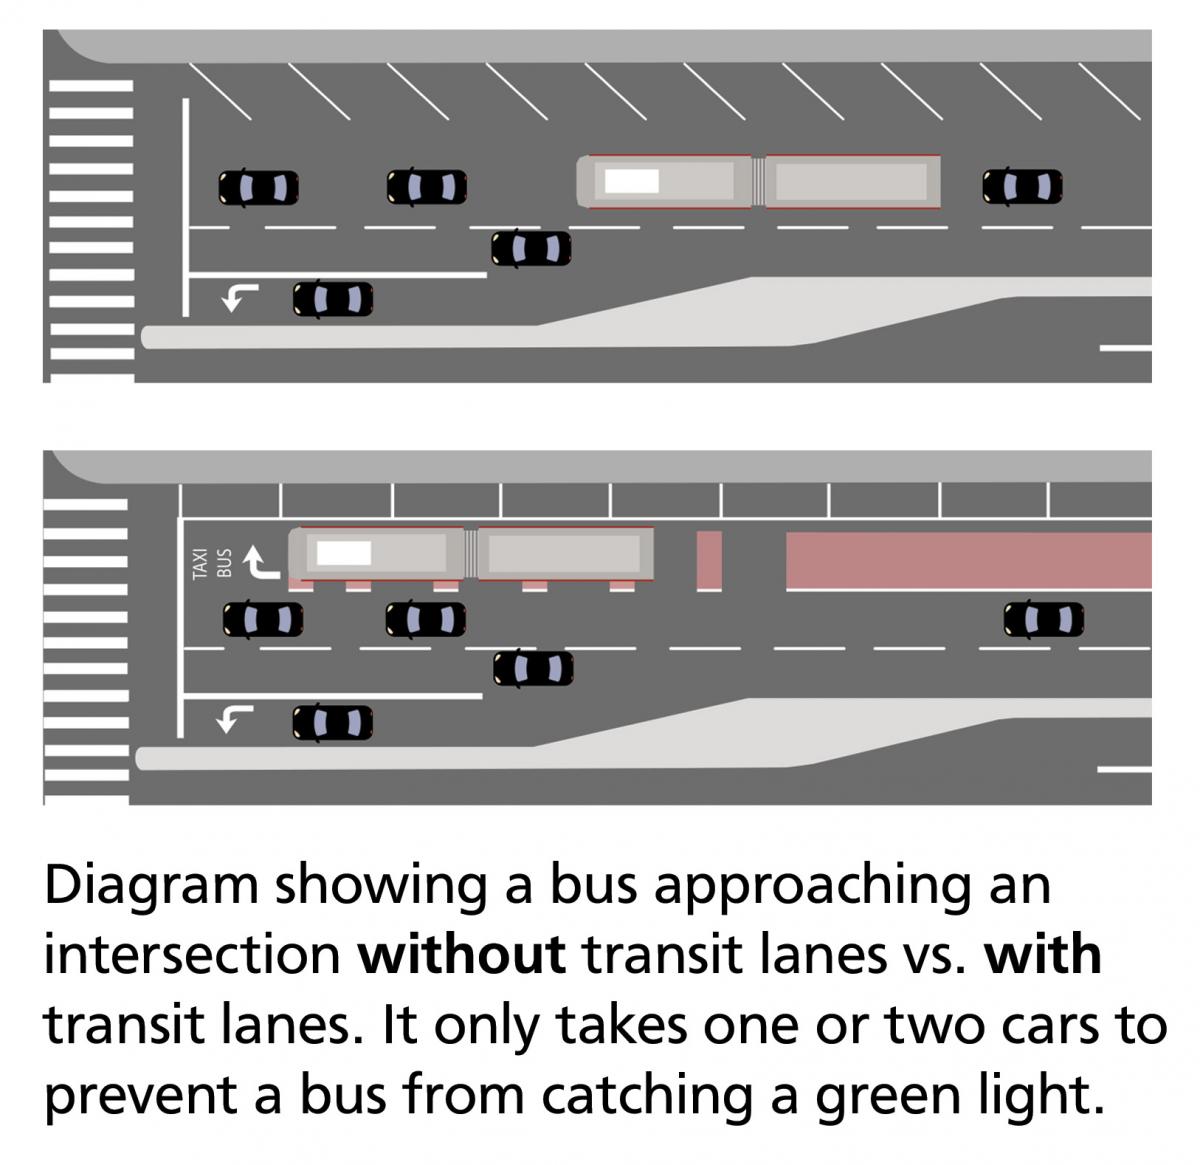 Two diagrams of a bus approaching an intersection. The first image shows a street with two gereral purpose lanes and no transit lanes; the bus is competing with traffic and is stuck behind two cars waiting to cross the intersection. In the second image, there are two general lanes and one transit lane; the bus is able to make it to the intersection unimpeded. It only takes one or two cars to prevent a bus from catching a green light. 